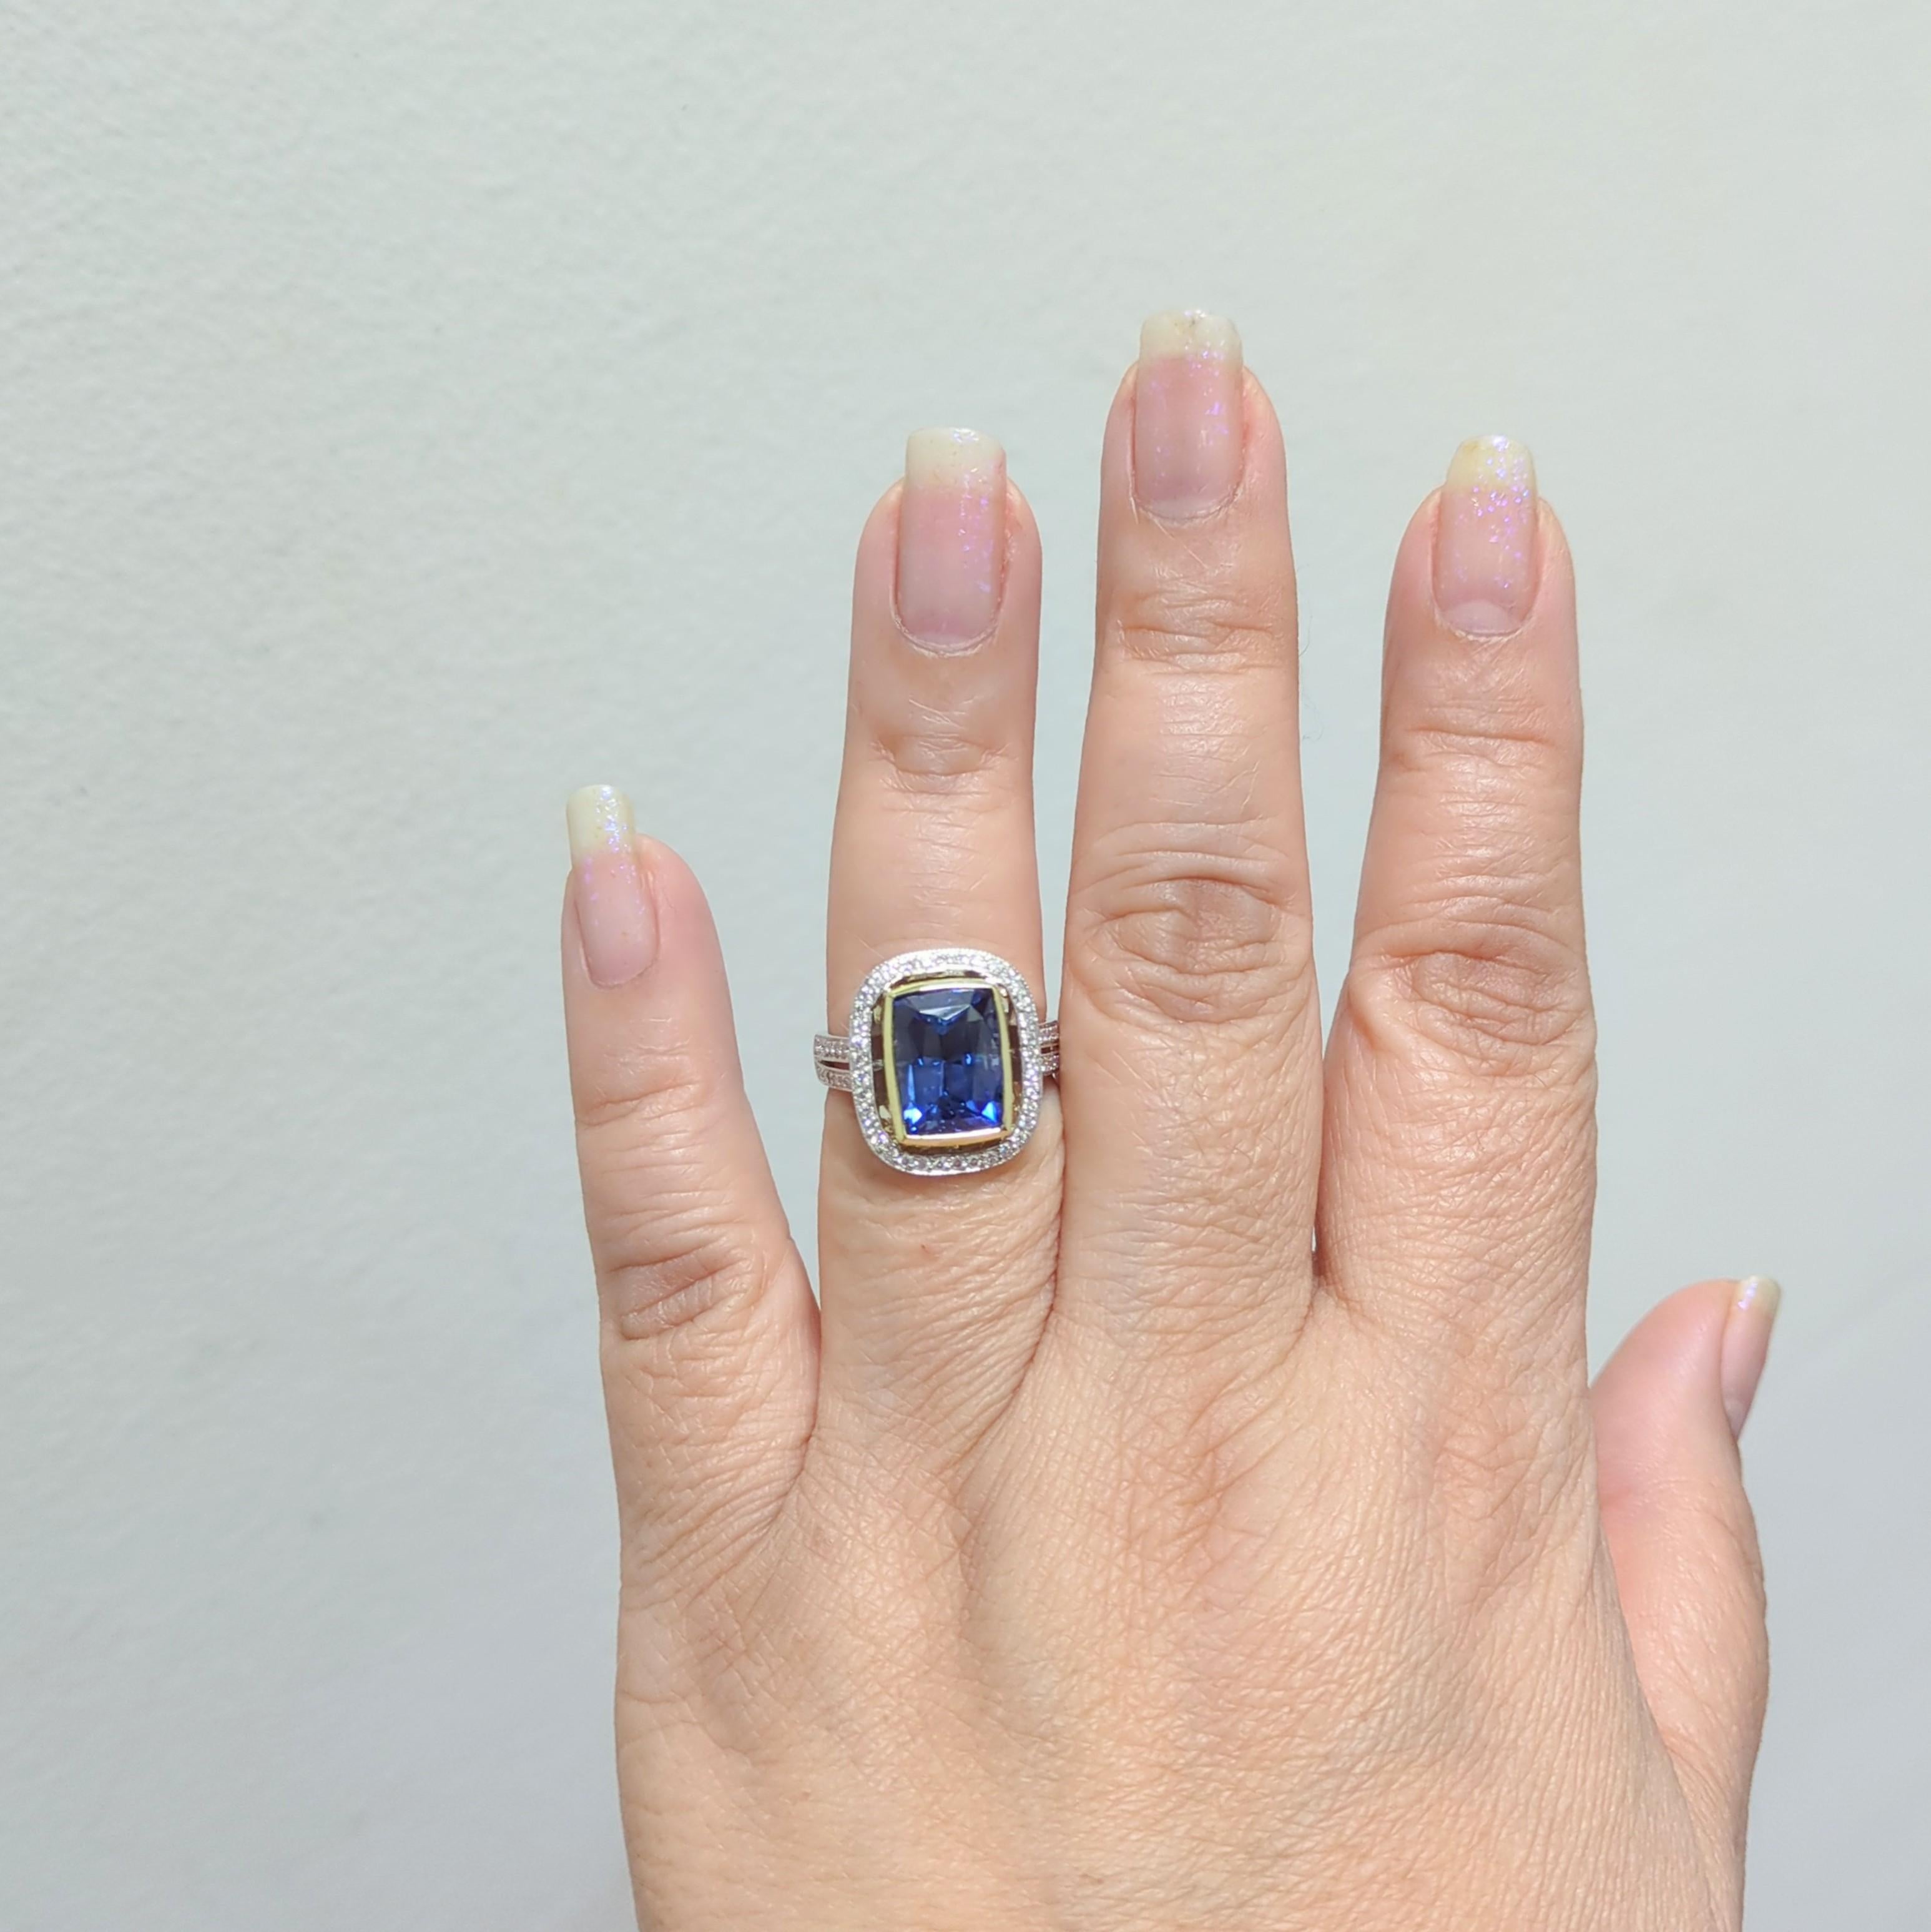 Gorgeous bright blue sapphire weighing 6.80 ct. with good quality, white, and bright diamond rounds.  Handmade in platinum and 18k yellow gold.  Ring size 7.5